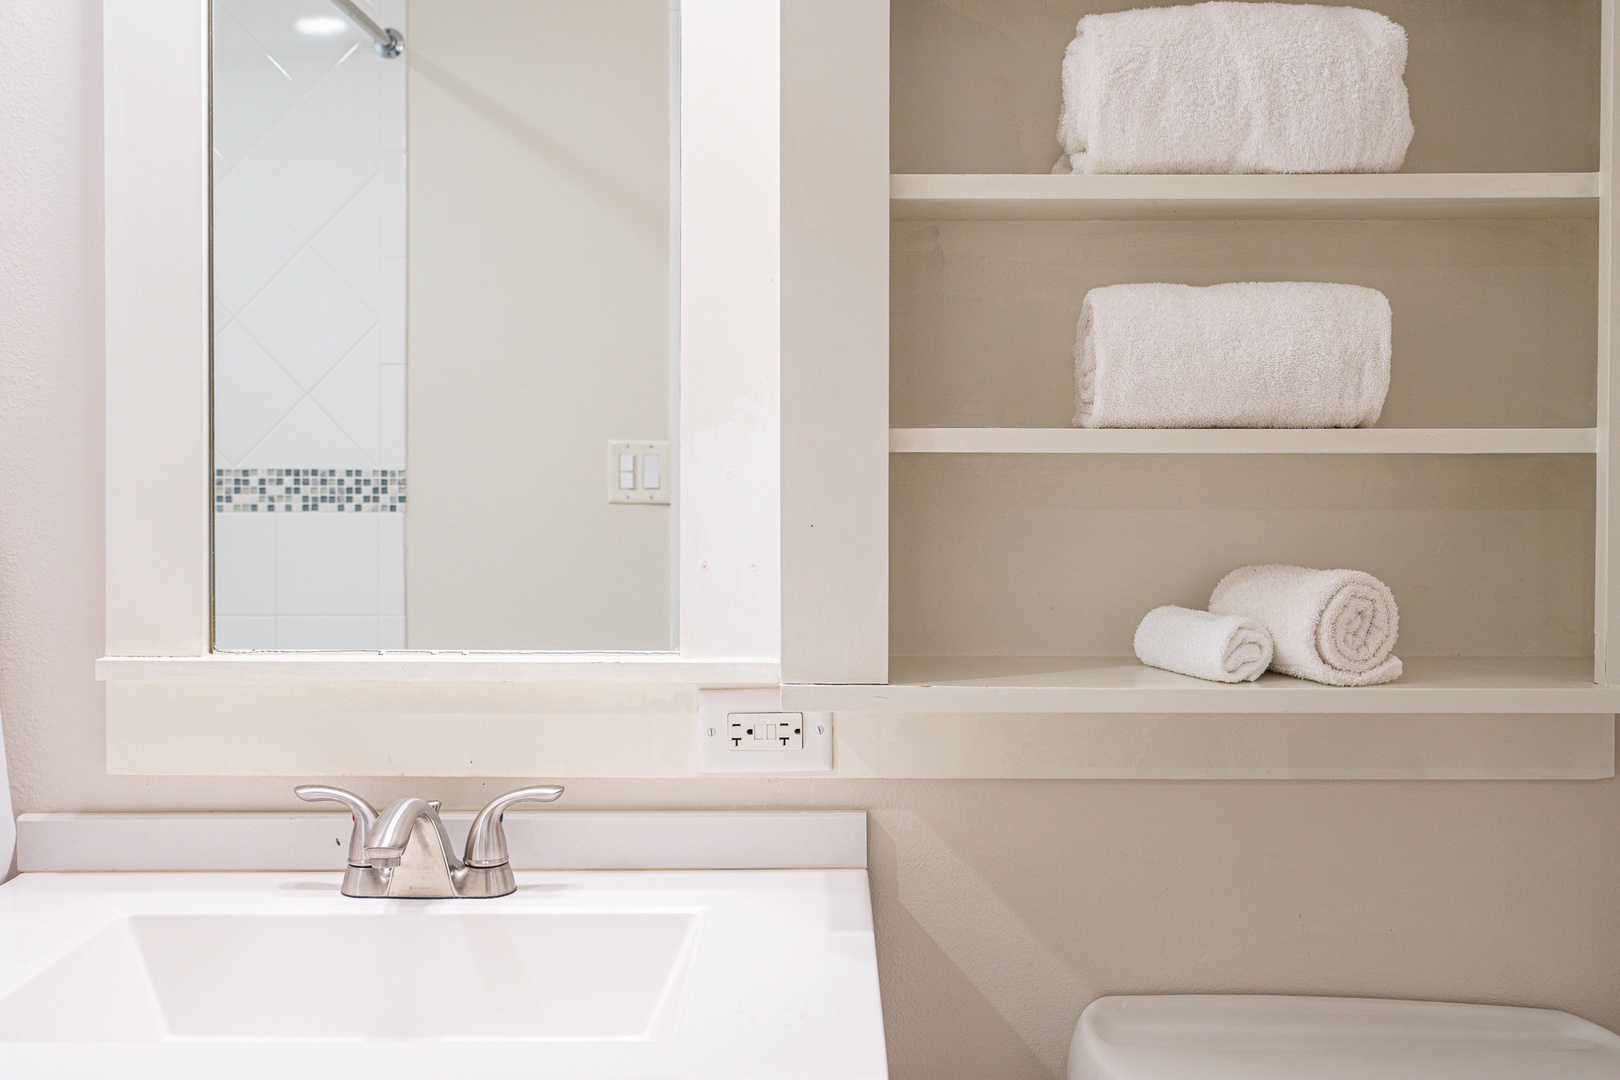 The airy full bathroom features a single vanity & shower/tub combo